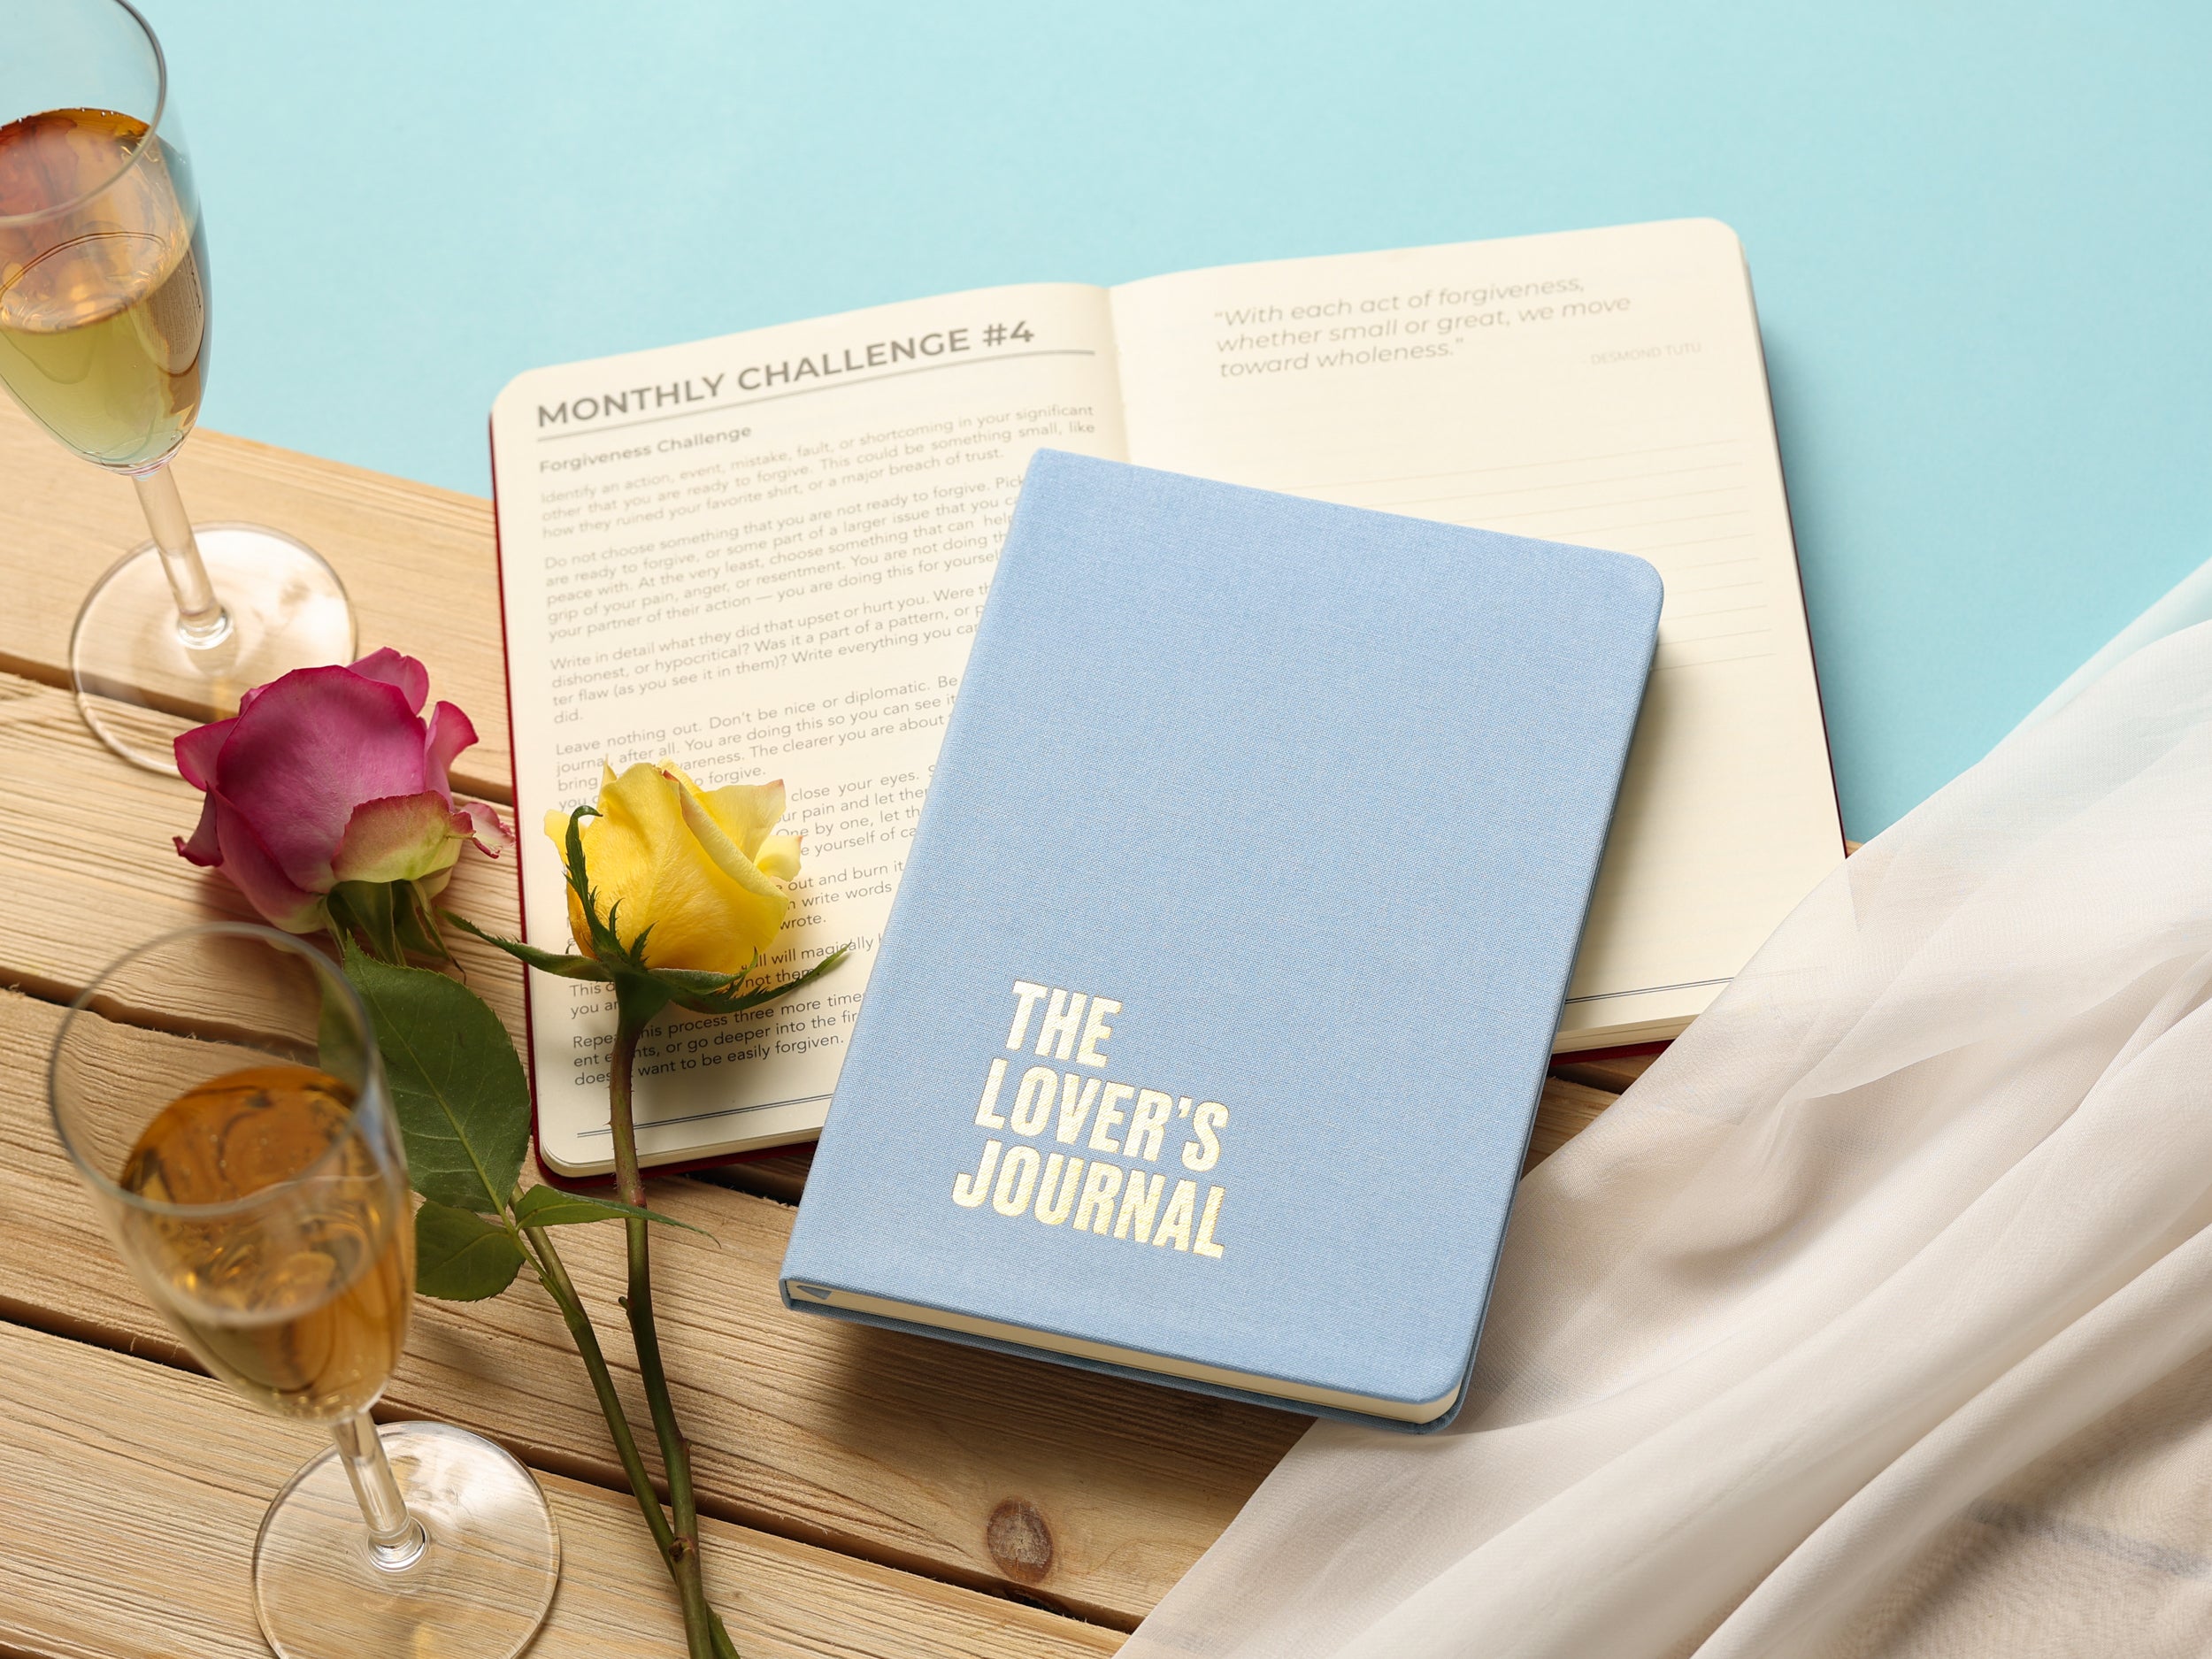 The Lovers Journal: Better couples communication through weekly interactive prompts.